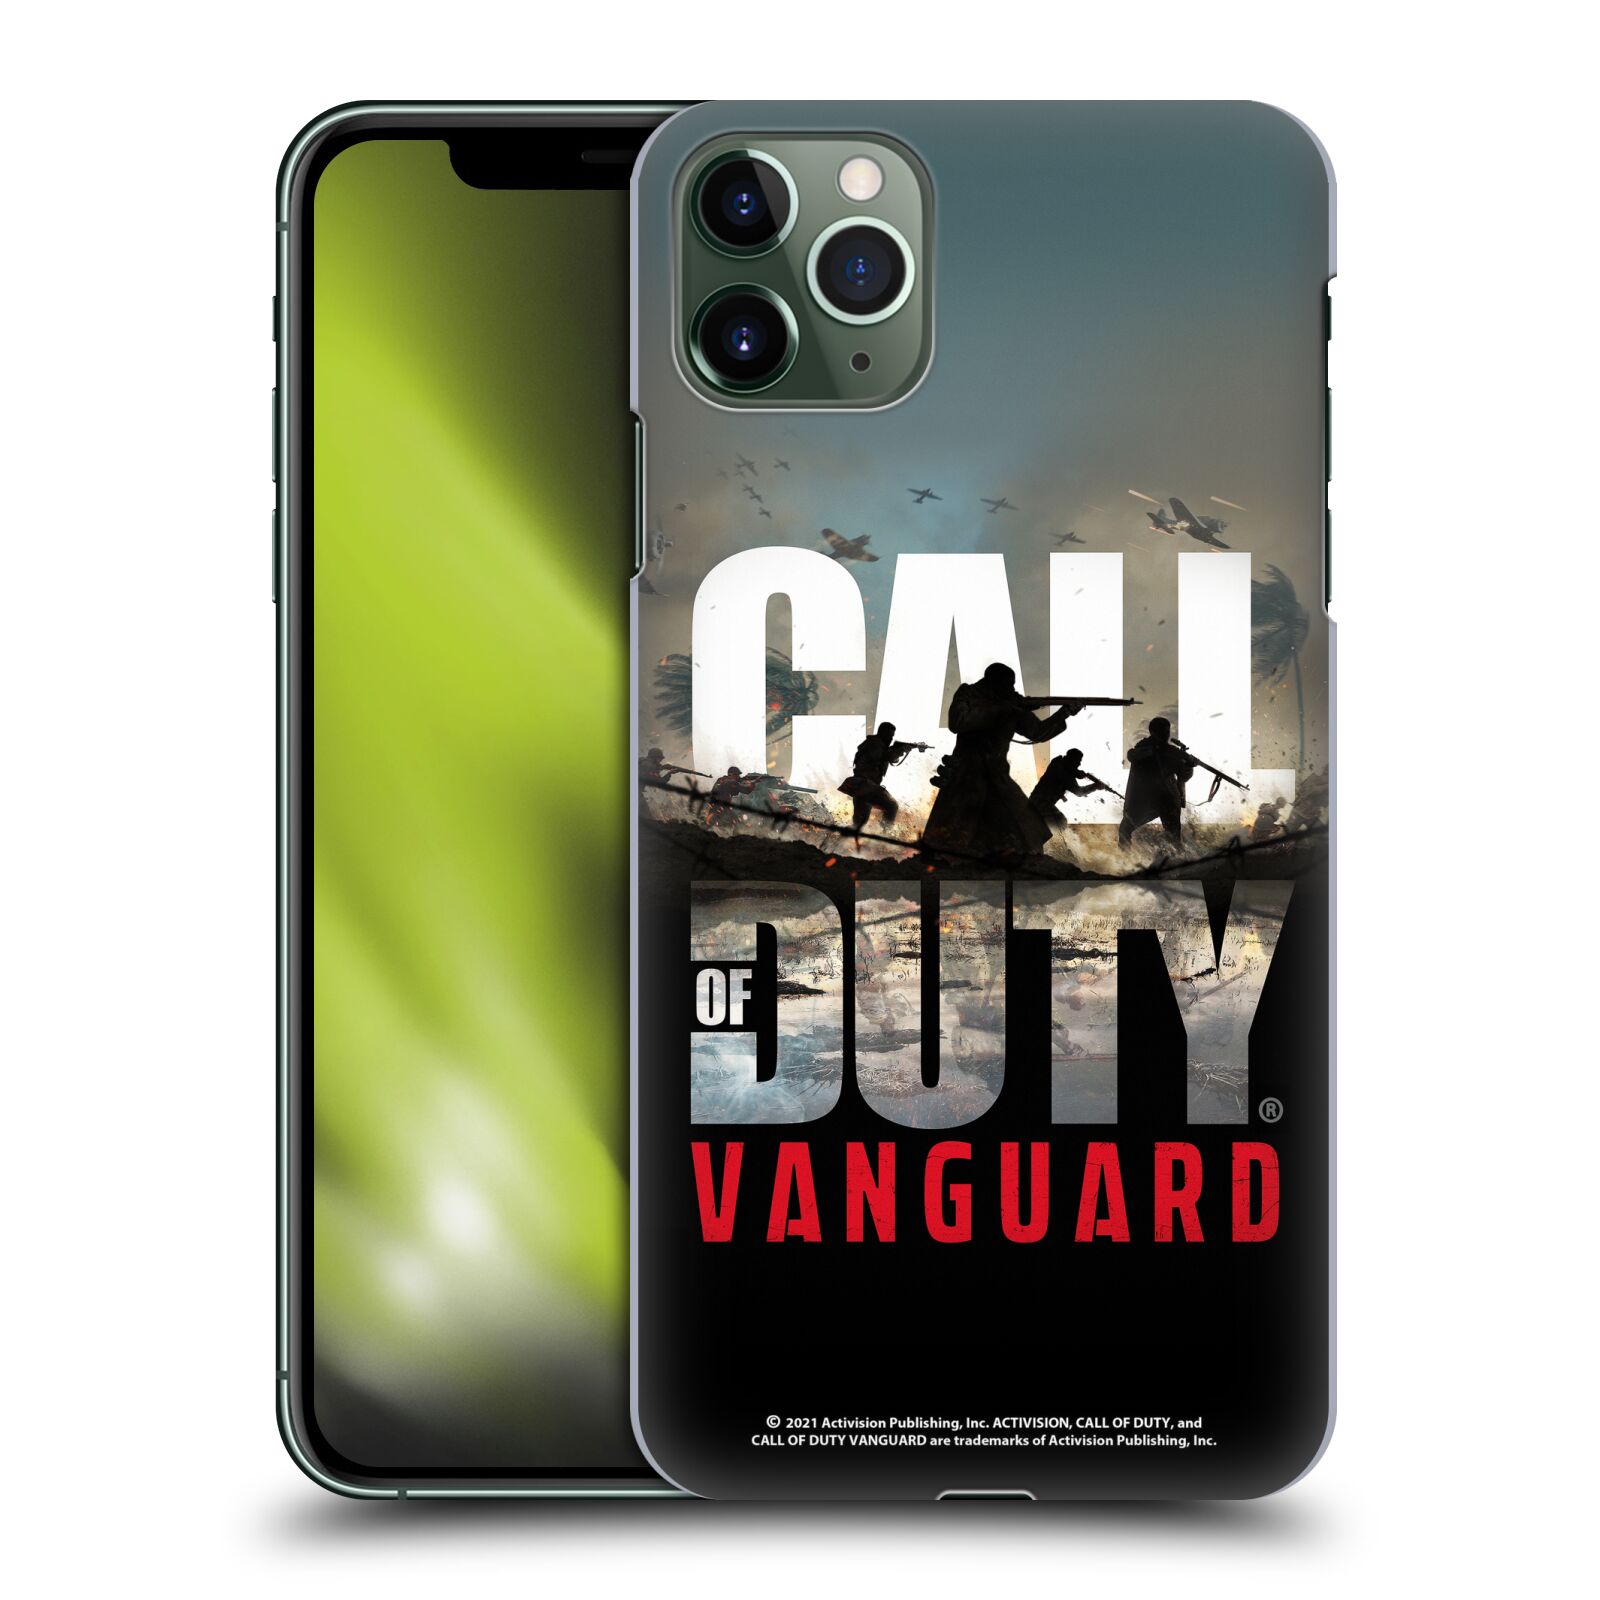 Zadní obal pro mobil Apple Iphone 11 PRO MAX - HEAD CASE - Call of Duty - Vanguard